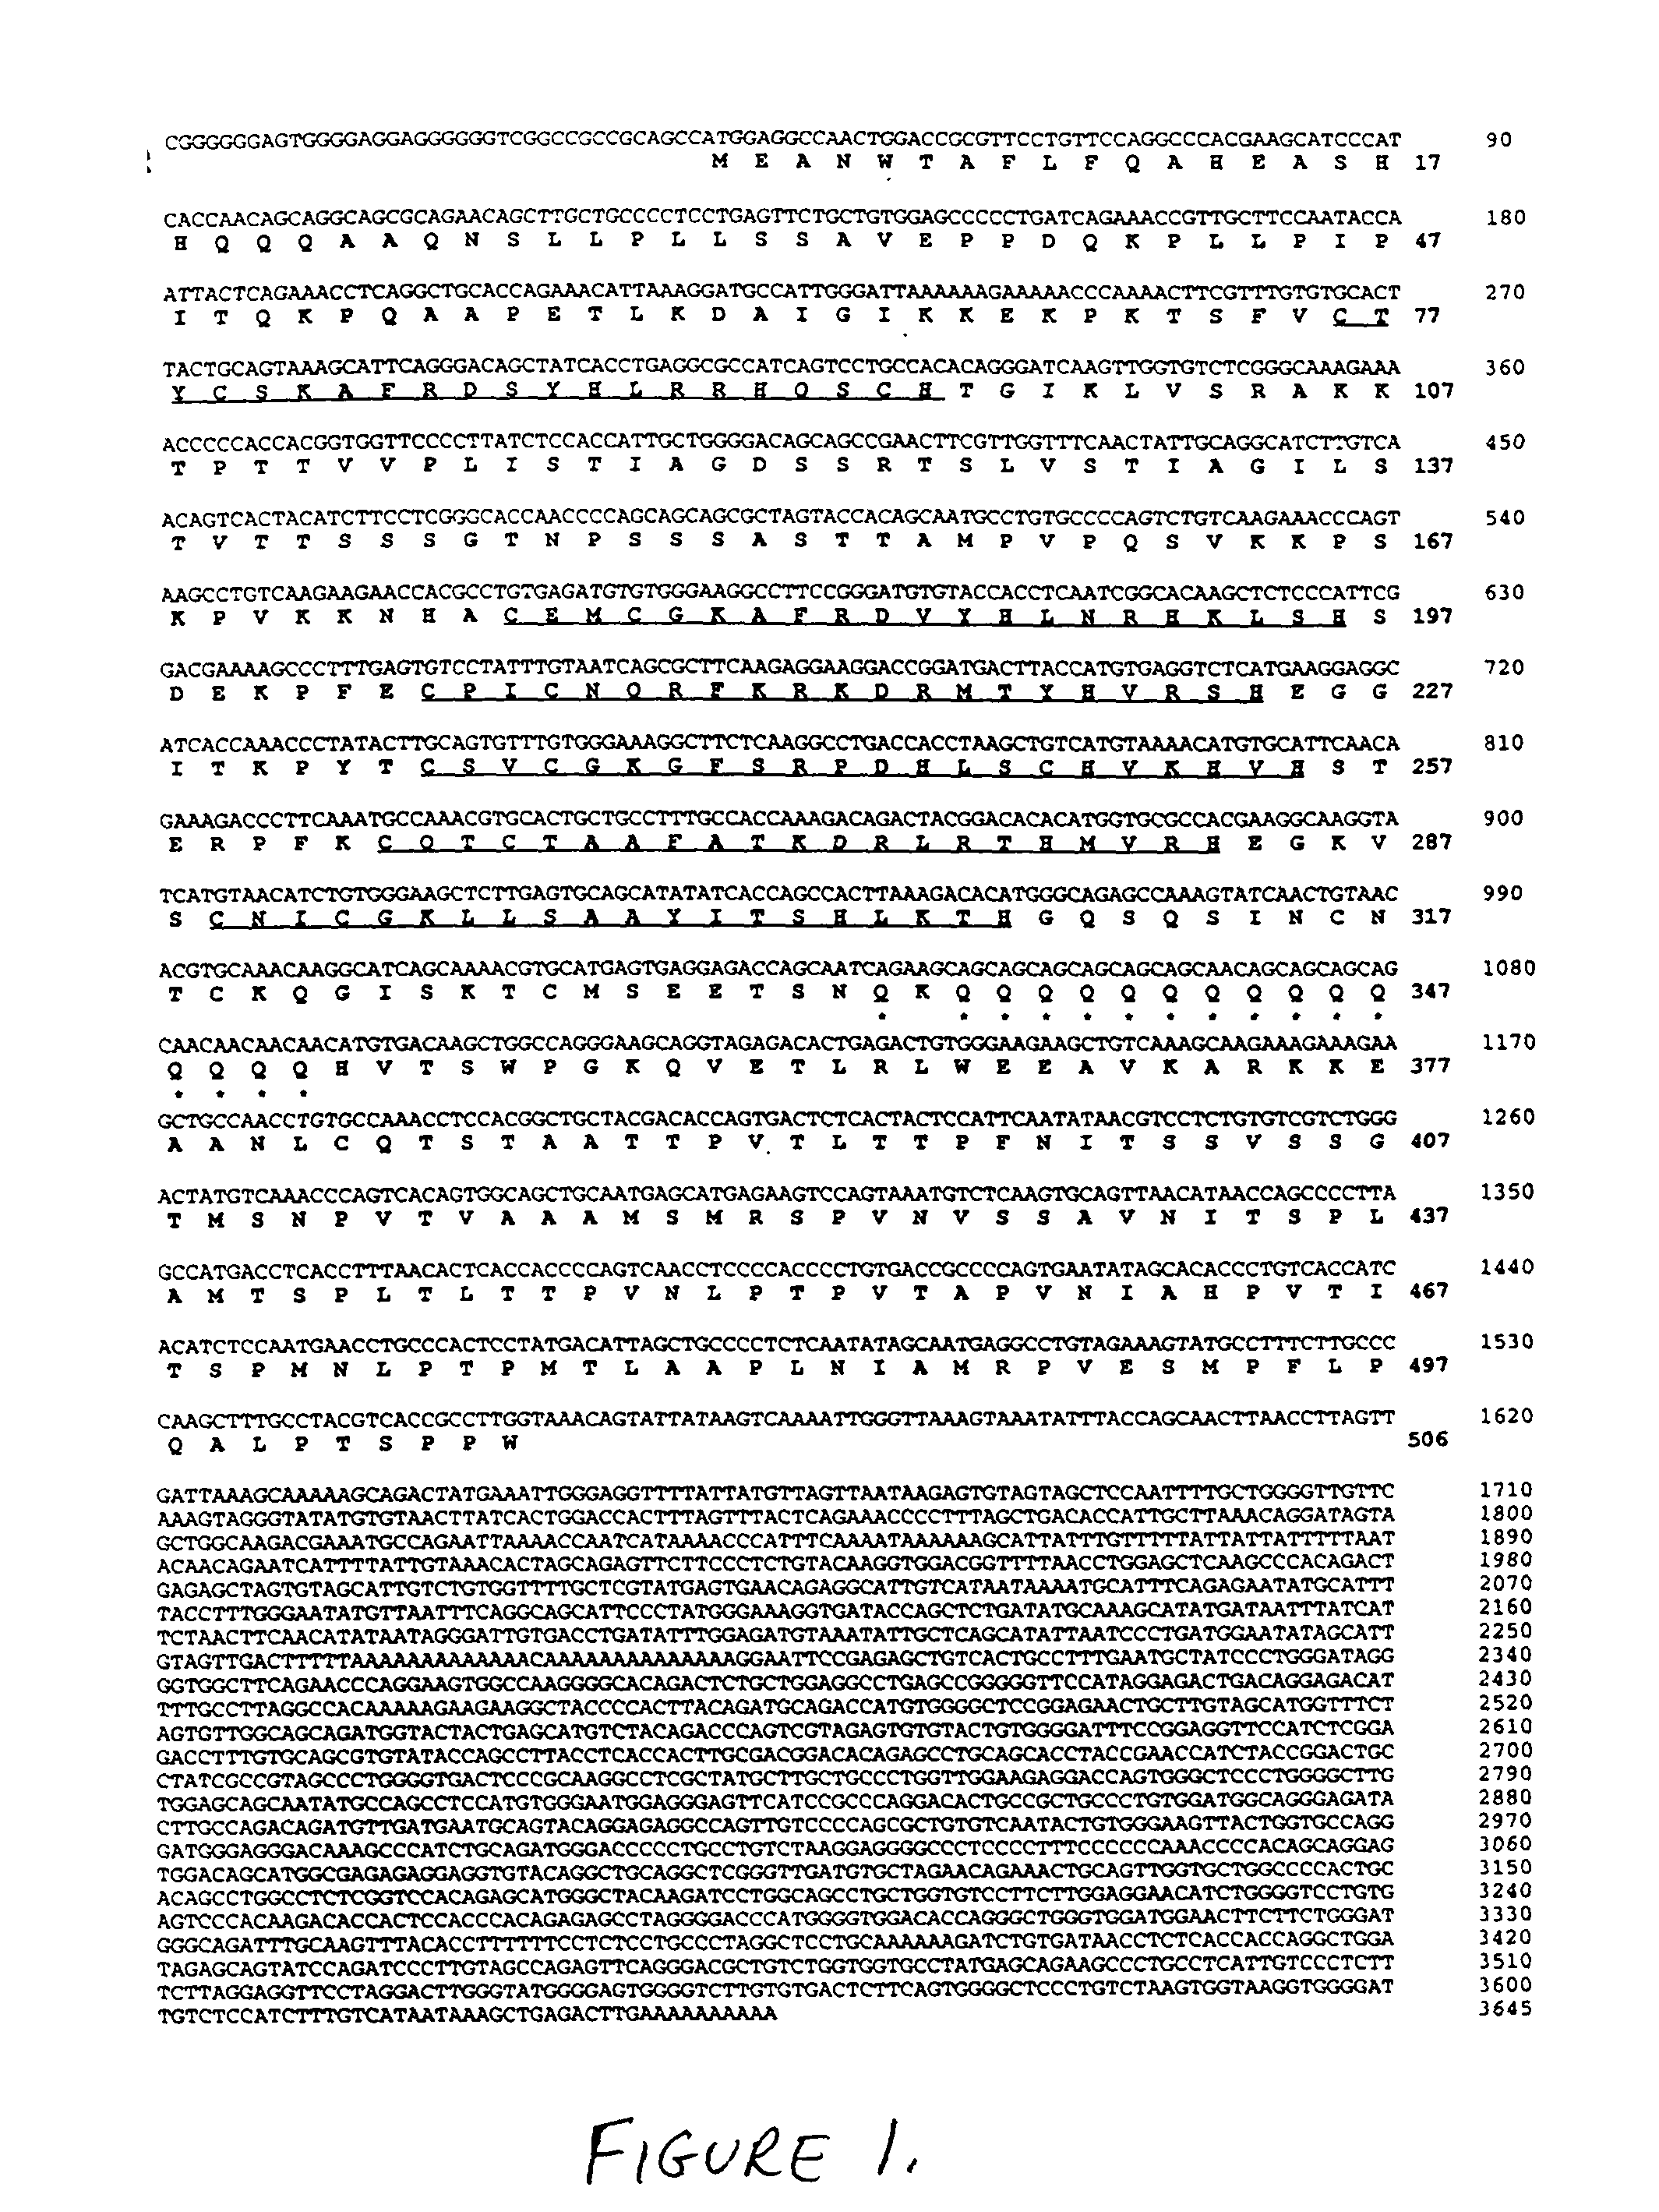 Vascular endothelial zinc finger 1 gene and protein and uses thereof